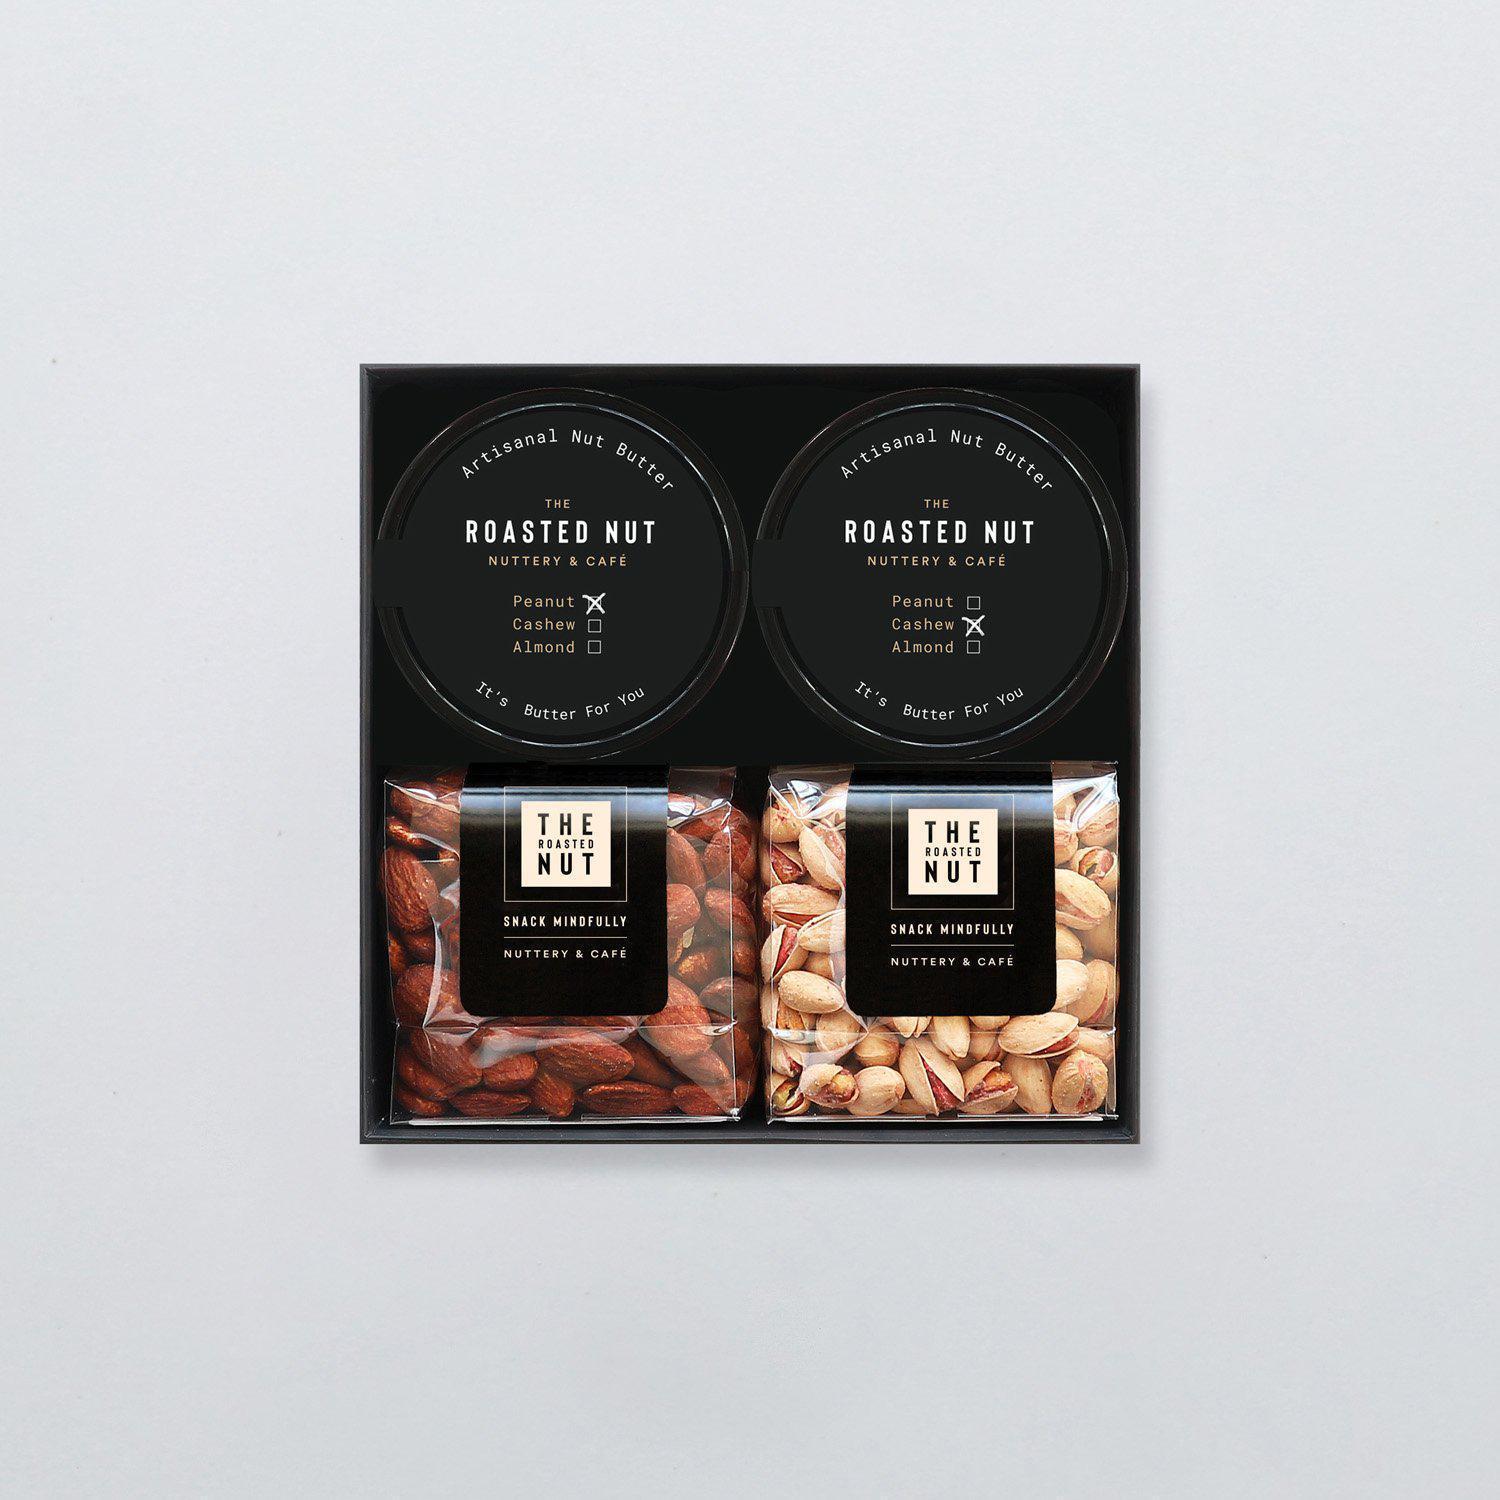 THE BLACK BOX - SMALL-Gift Box-The Roasted Nut Inc.